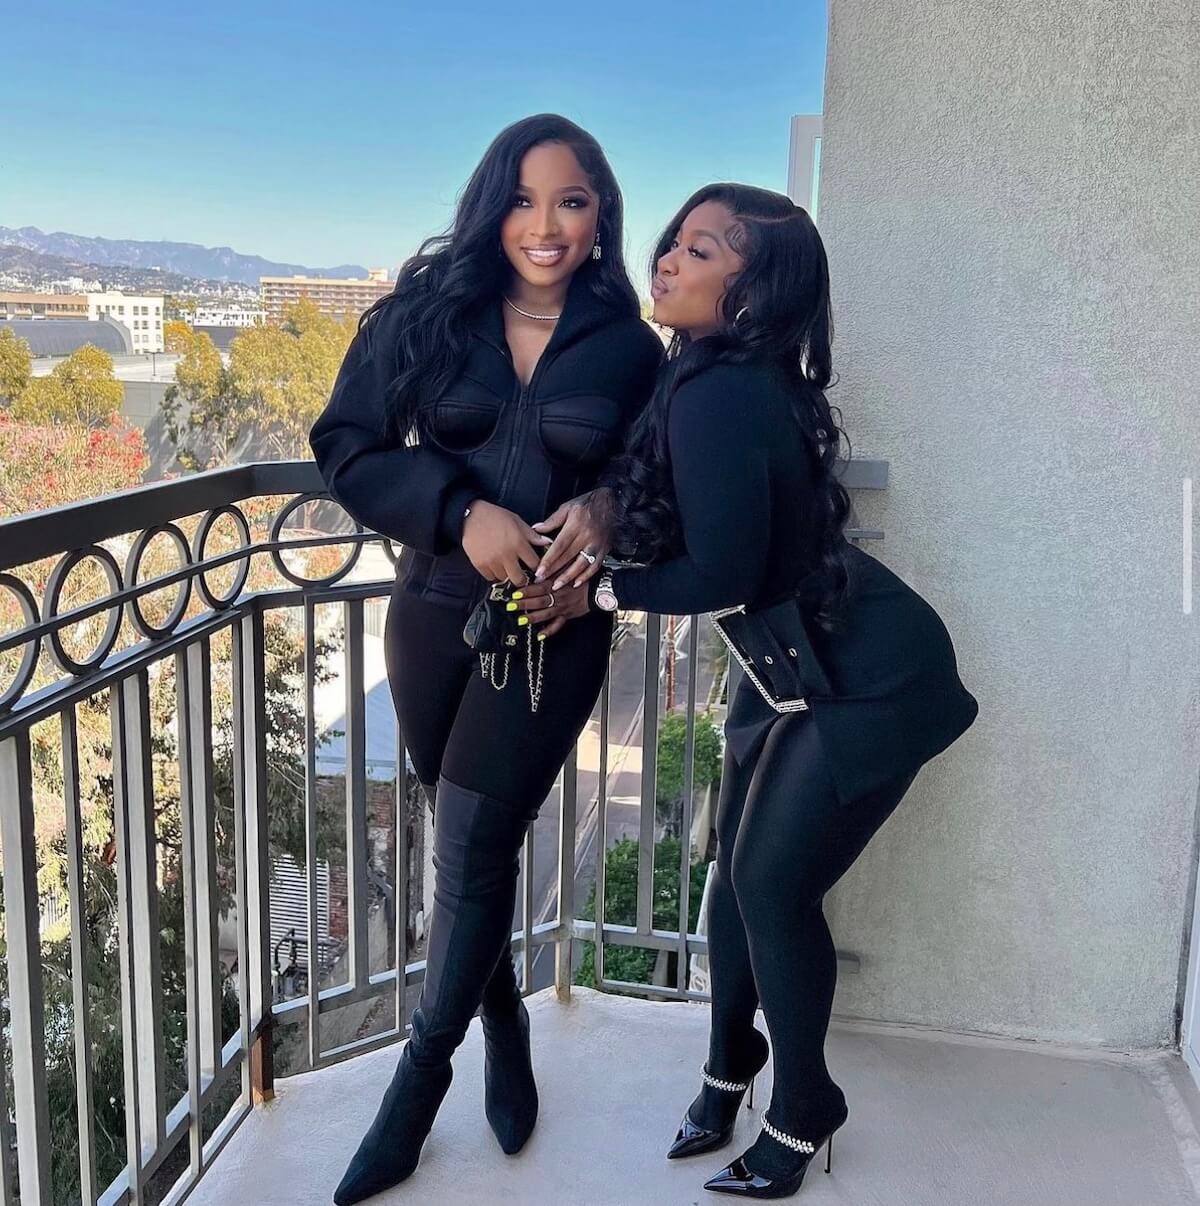 Toya Johnson-Rushing and Reginae Carter dressed in black and posing on a balcony